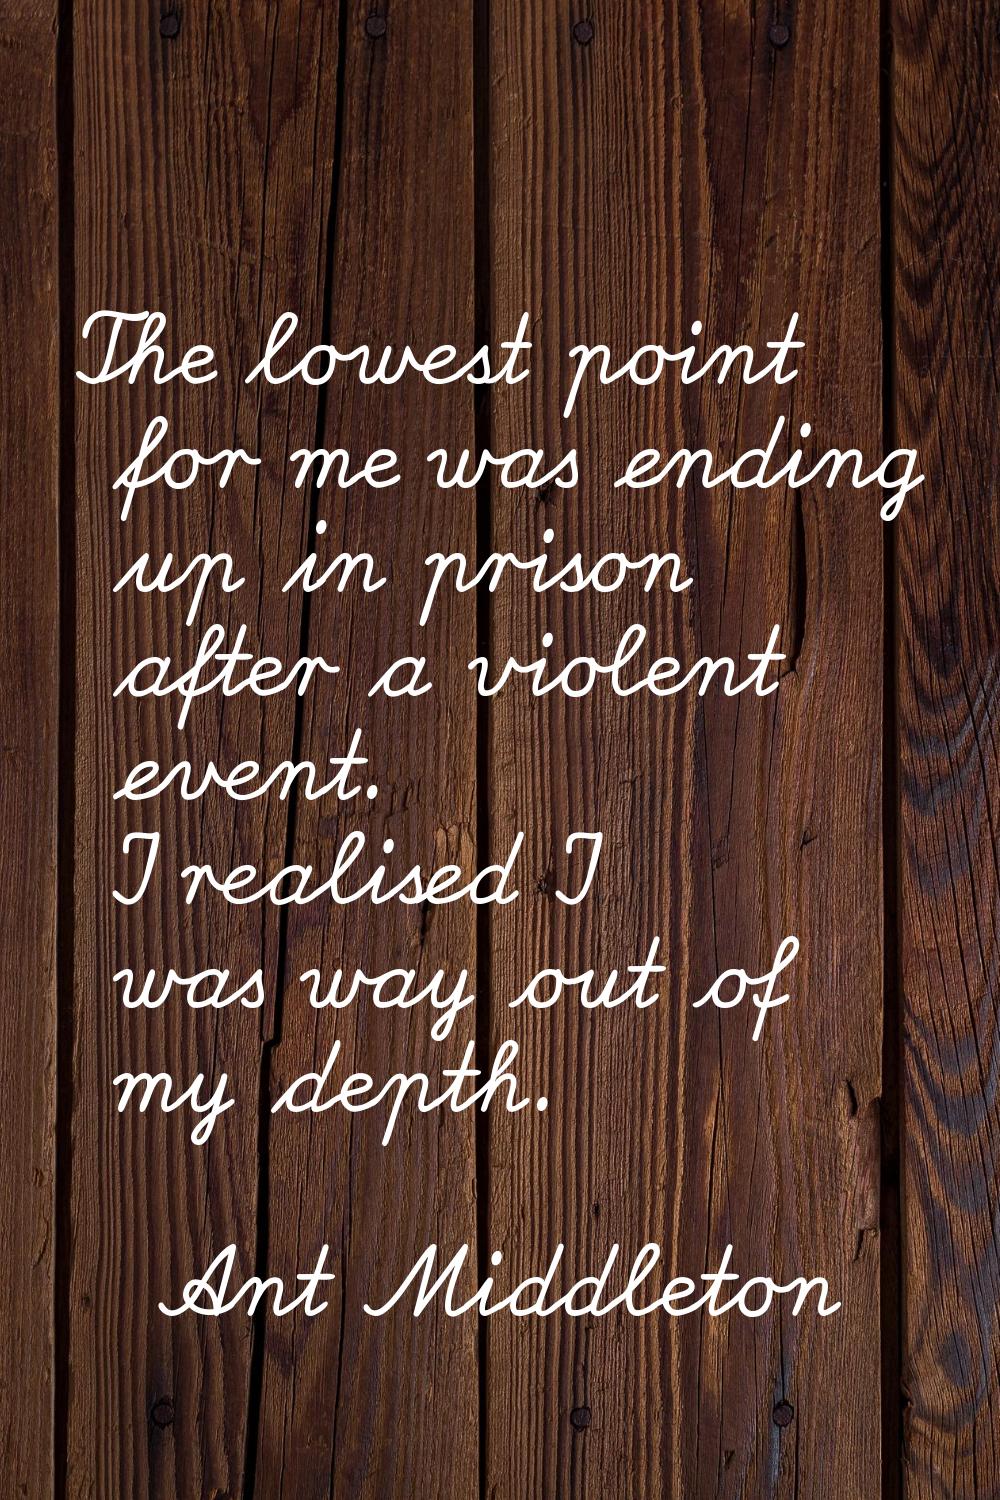 The lowest point for me was ending up in prison after a violent event. I realised I was way out of 